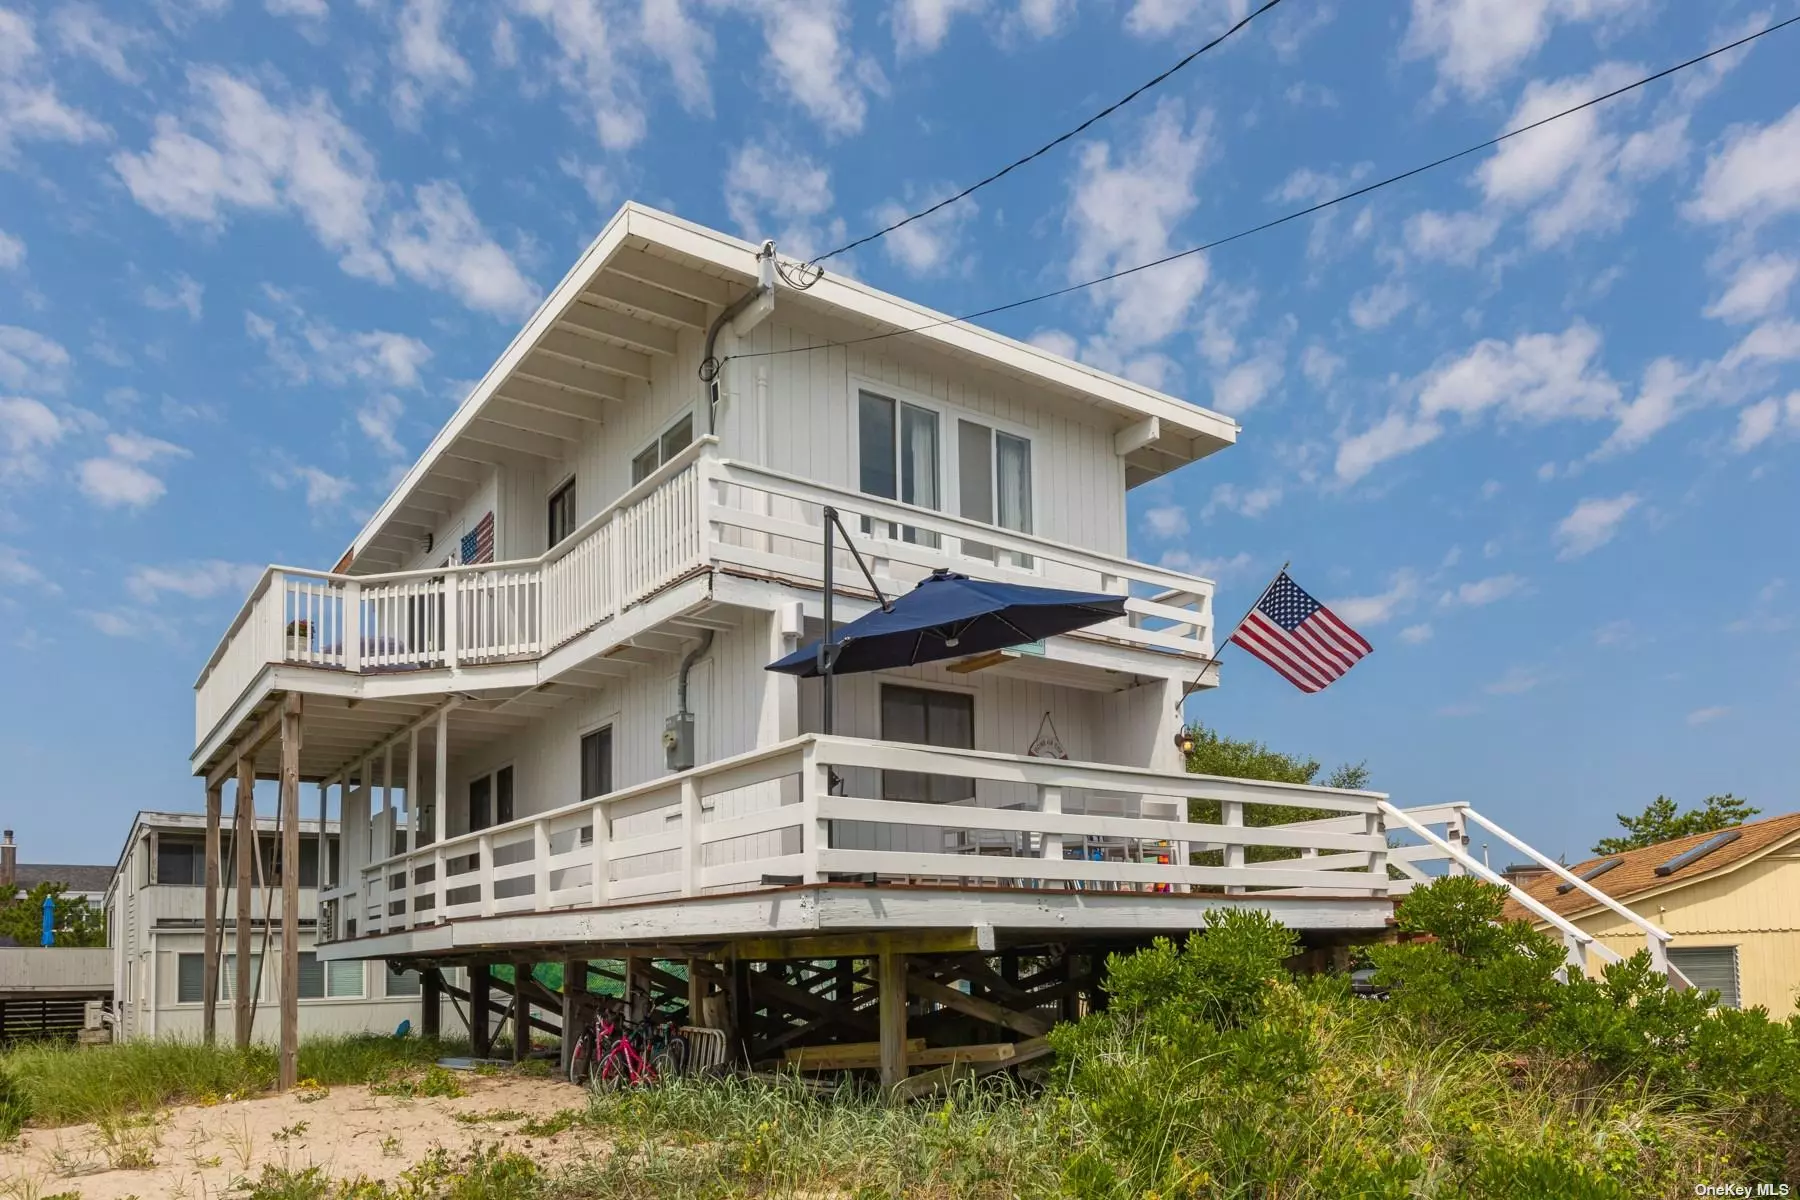 Reserve Your Kismet Fire Island Summer Vacation Now.!!! Super Convenient With Spectacular Views . This 3 from The Ocean 4 Br, 2 full bath Beach House comes fully Equipped ,  w/ full ac, outdoor shower, washer/dryer. Open Concept Living Room/Kitchen, W/ Sliders to Upper level Deck , Sleeps 10 Comfortably , #1 Primary w/ King Bed, # 2 Bedroom w/ 2 twin beds & 1 full bed, #3 Bedroom w/ 3 twin beds, #4 Bedroom w/ 1 twin bed & 1 full bed. This house also features: propane bbq, 5 bikes w/ locks, 1 wagon w/ lock, ocean paddle/surf board, 1 surf cast pole, 4 kids bay fishing rods, 10 beach chairs, 2 mini beach lacrosse cages, 2 boogie boards, 1 skim board, sand toys & shovels. Available Dates Now.!! May,  June 1-14 , Aug 1-13 , Sept 4-30,  Oct.